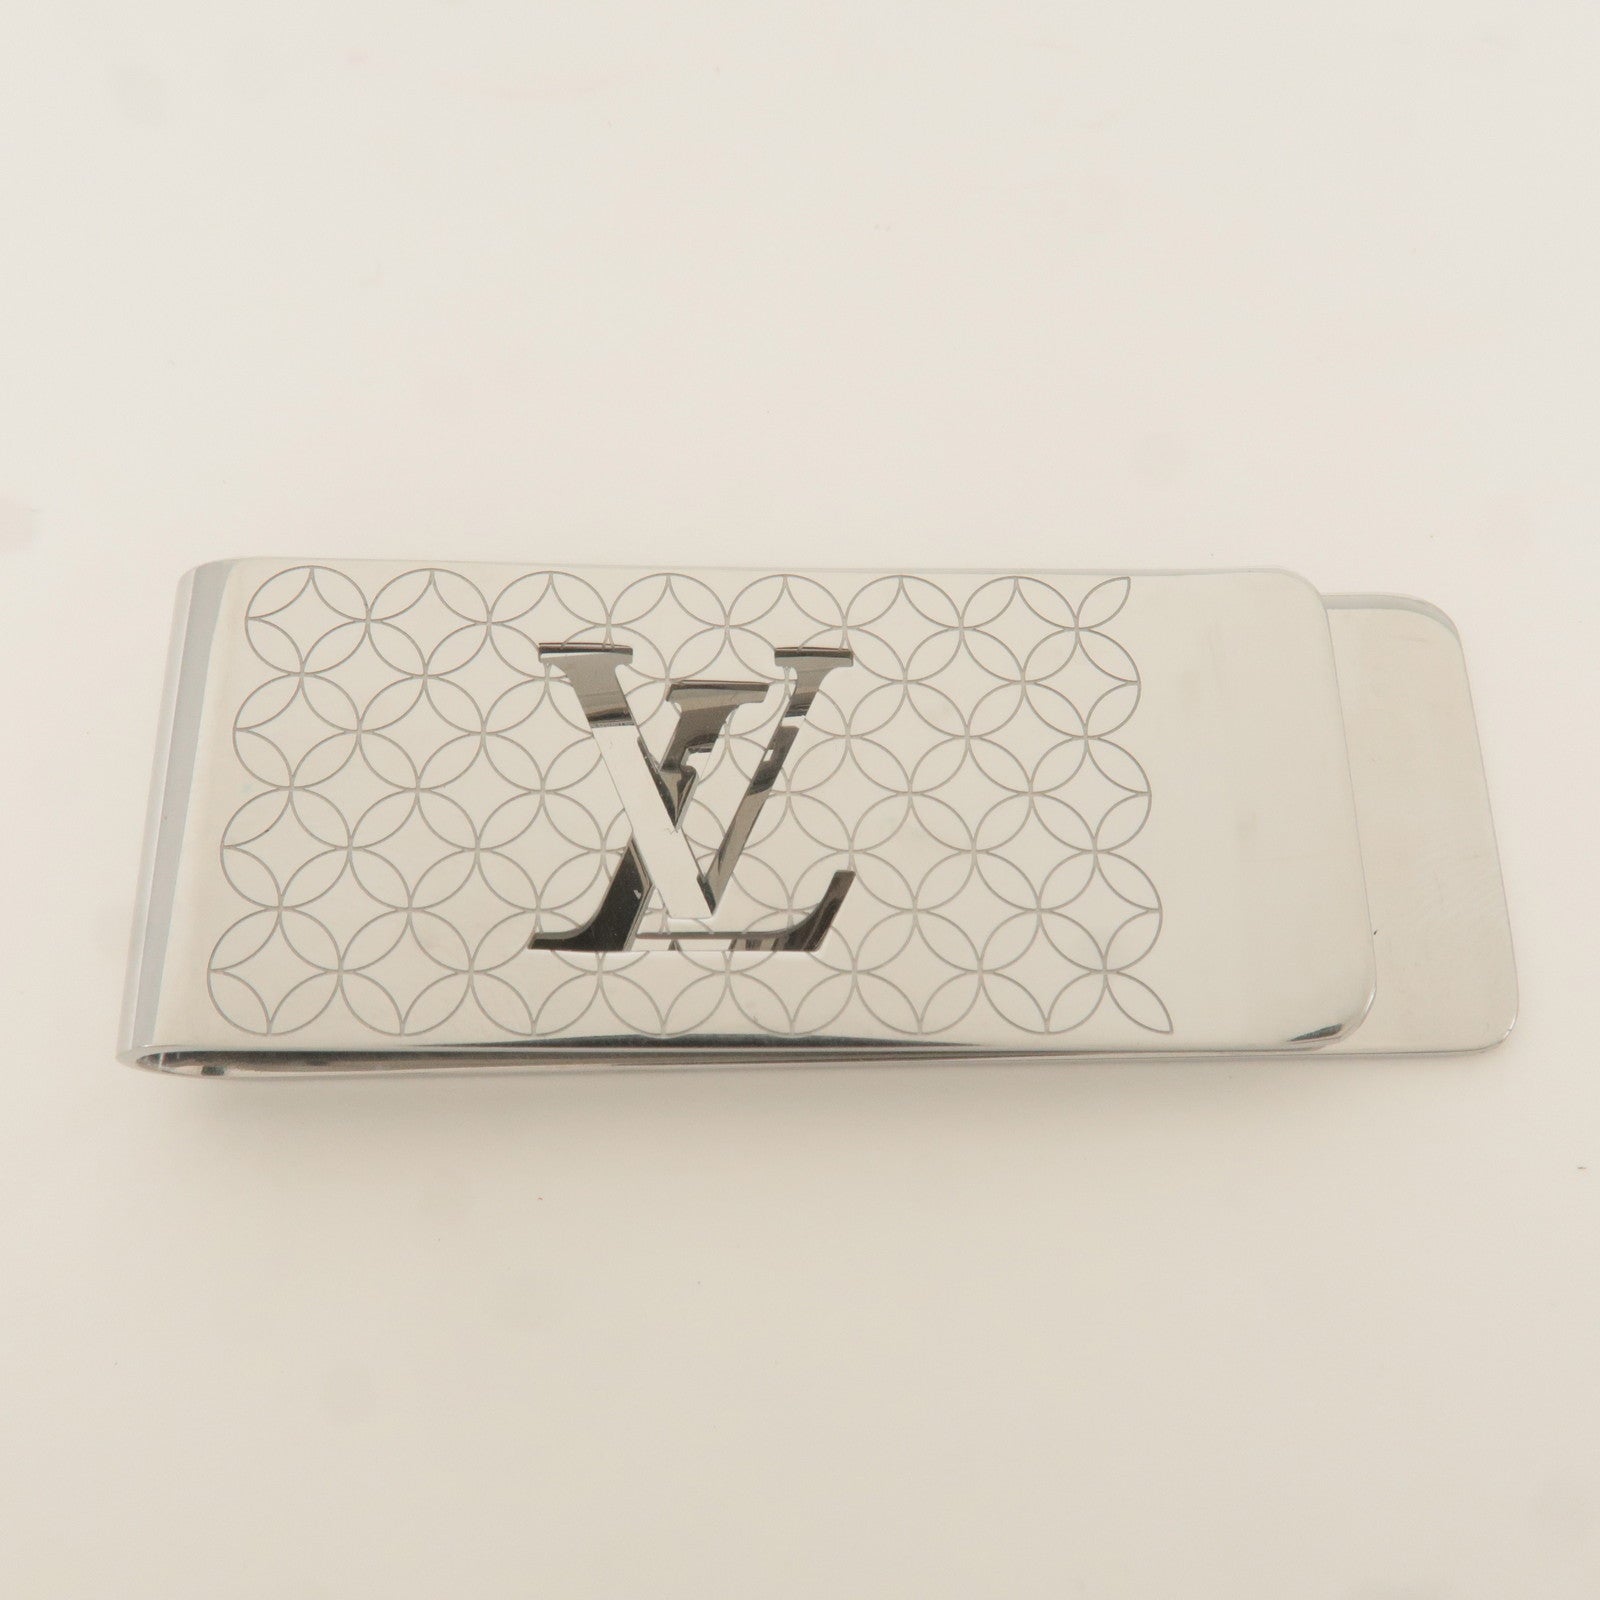 Louis Vuitton, Accessories, Louis Vuitton Pince Cravate Champs Elysees  Other Jewellery M6542 Silver